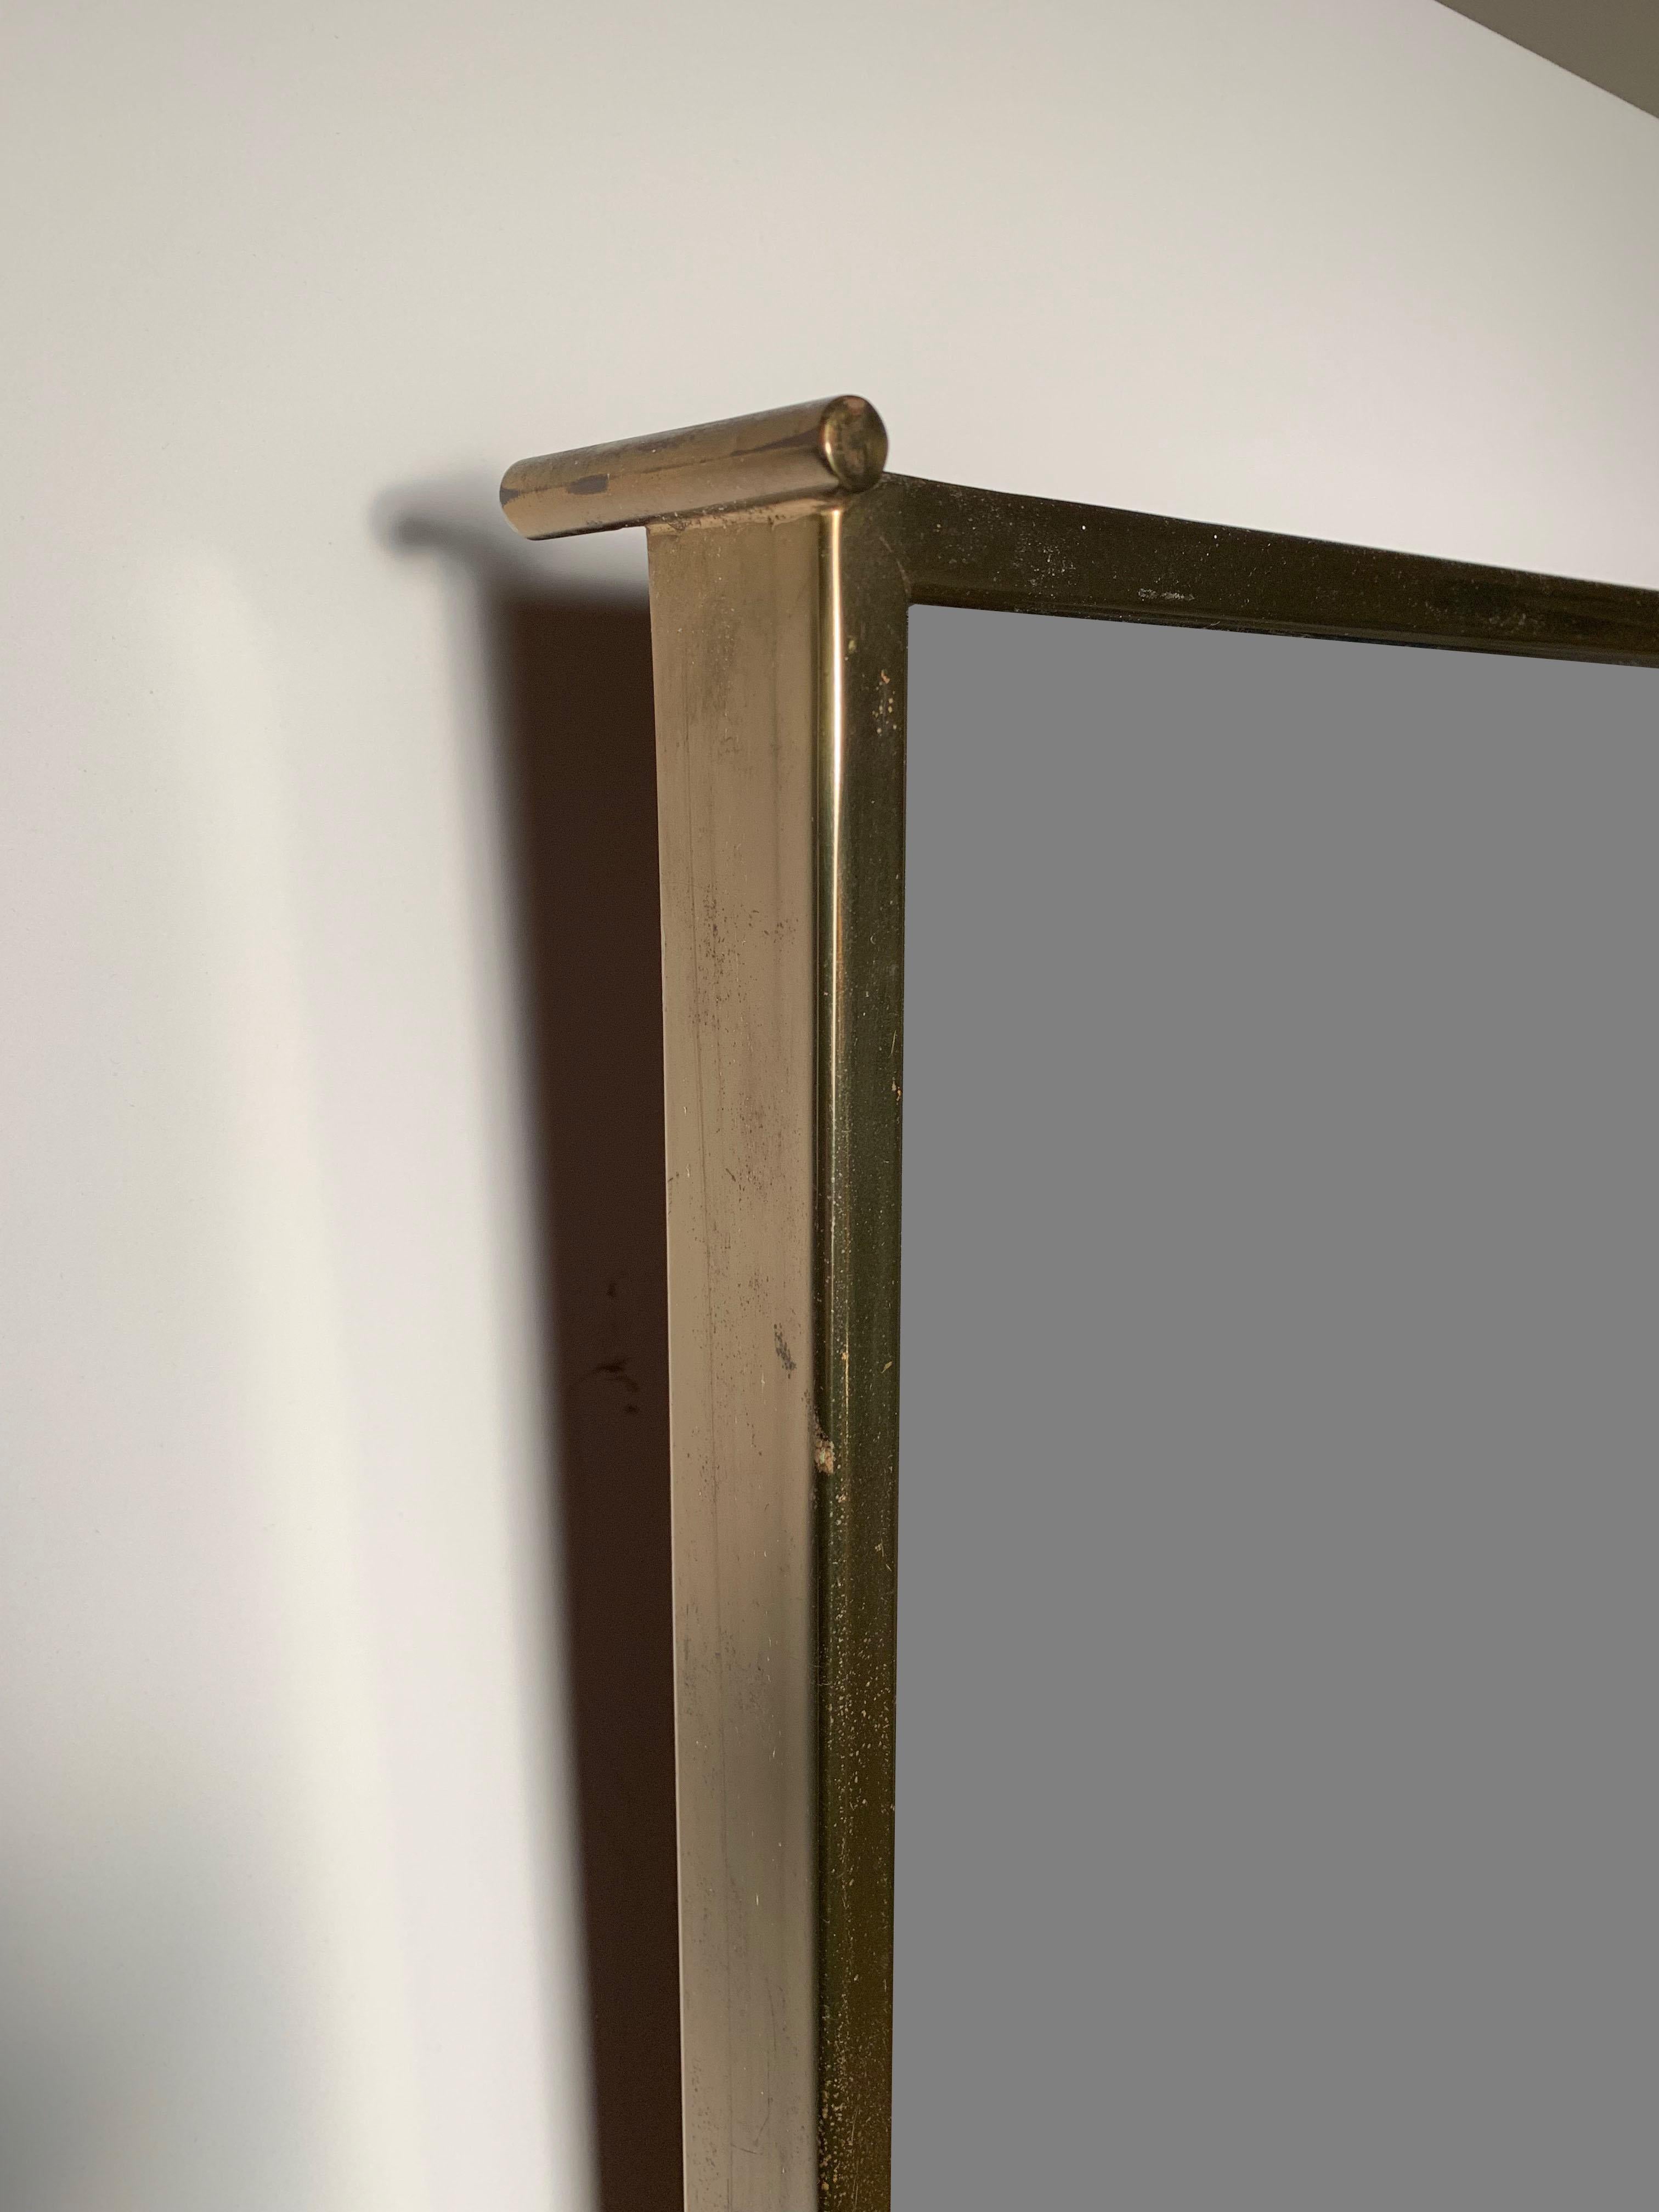 PAUL MCCOBB Brass X Mirror. One of Mccobb's strongest Mirror Designs. Brass Pegs at each corner to suspend the mirror off the wall. Large brass X form on front of mirror. Decorative yet not detracting from the function the mirror serves.